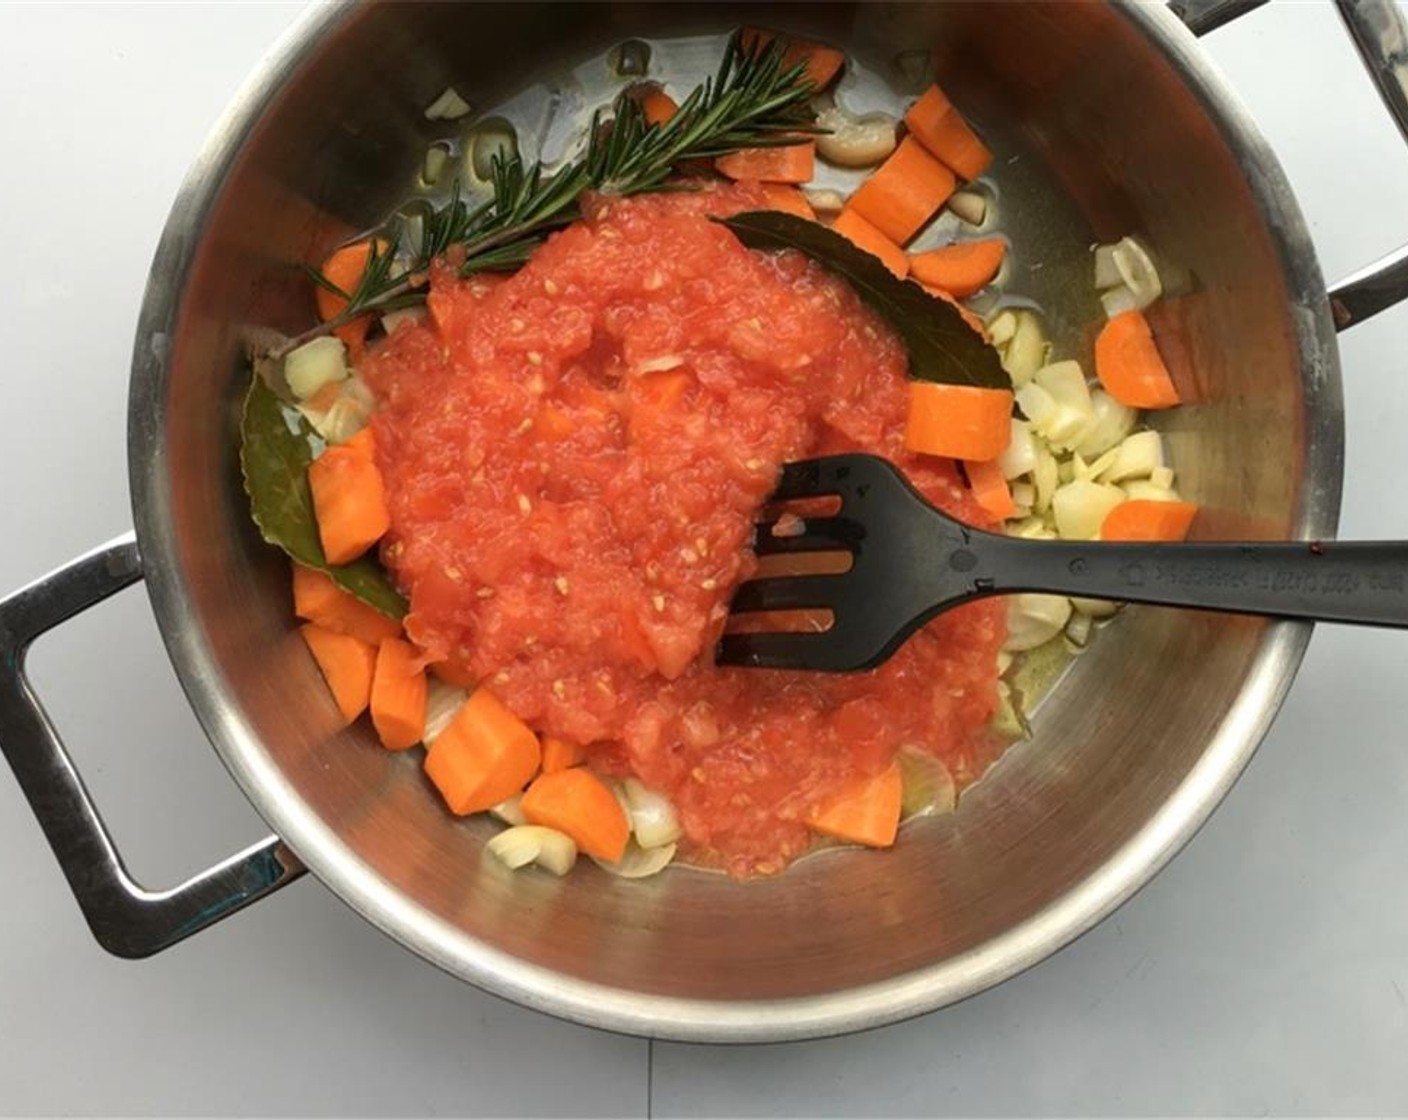 step 2 Place the casserole over medium-high heat and gently stir fry the ingredients for 4 minutes. Peel and chop up the  Carrot (1). Blend the fresh Tomatoes (2) into a pulp. Add both the tomatoes and carrot to the casserole.